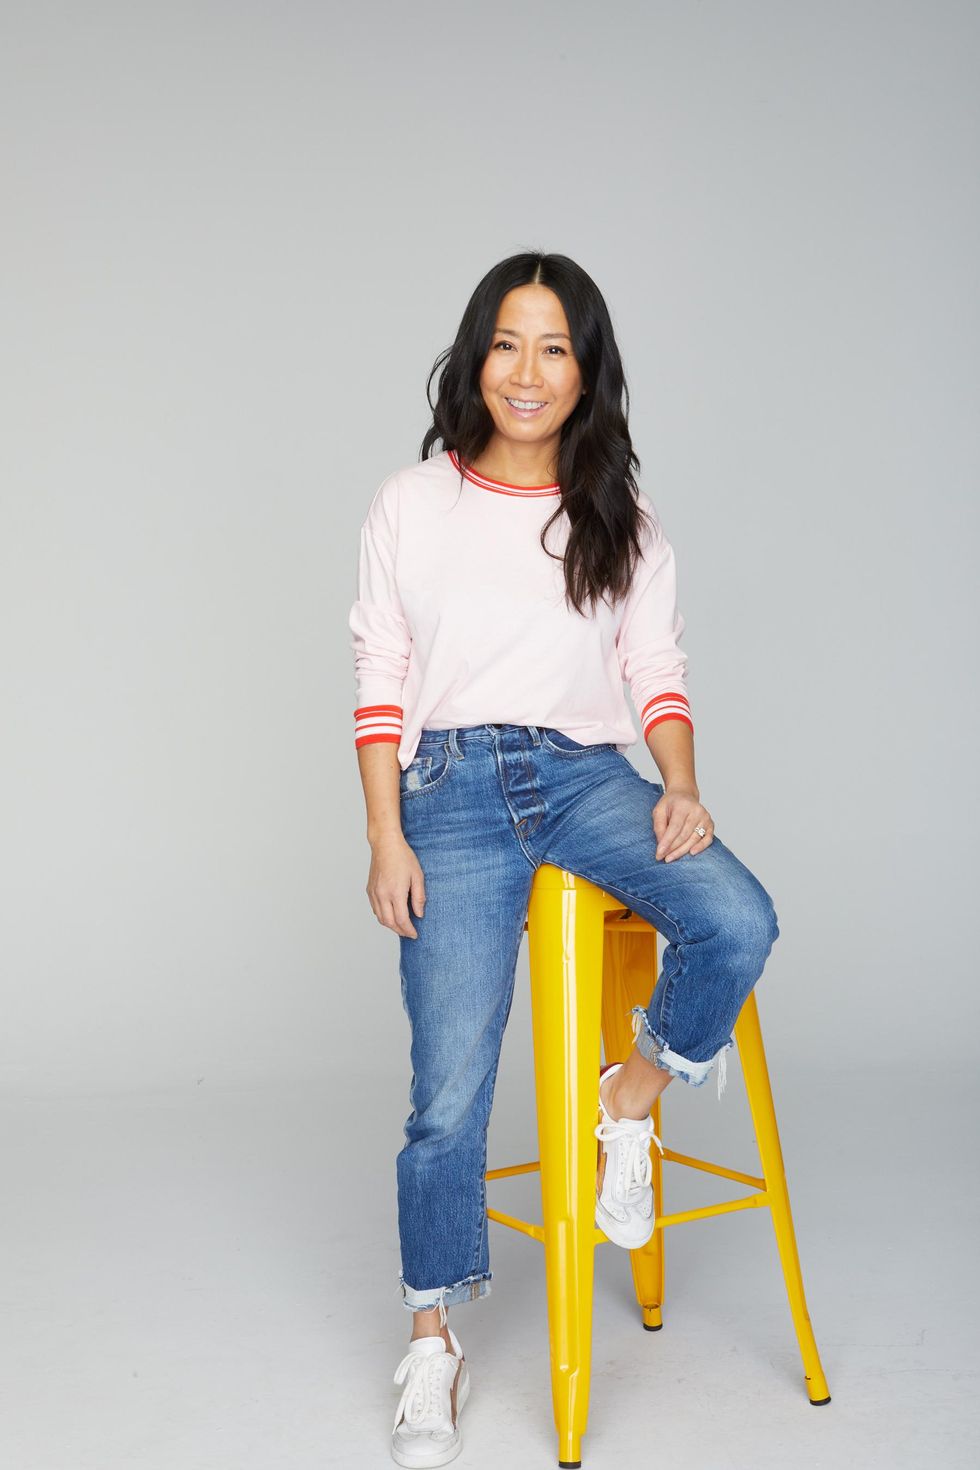 Phuong Ireland, Founder and CEO of Wknd Nation